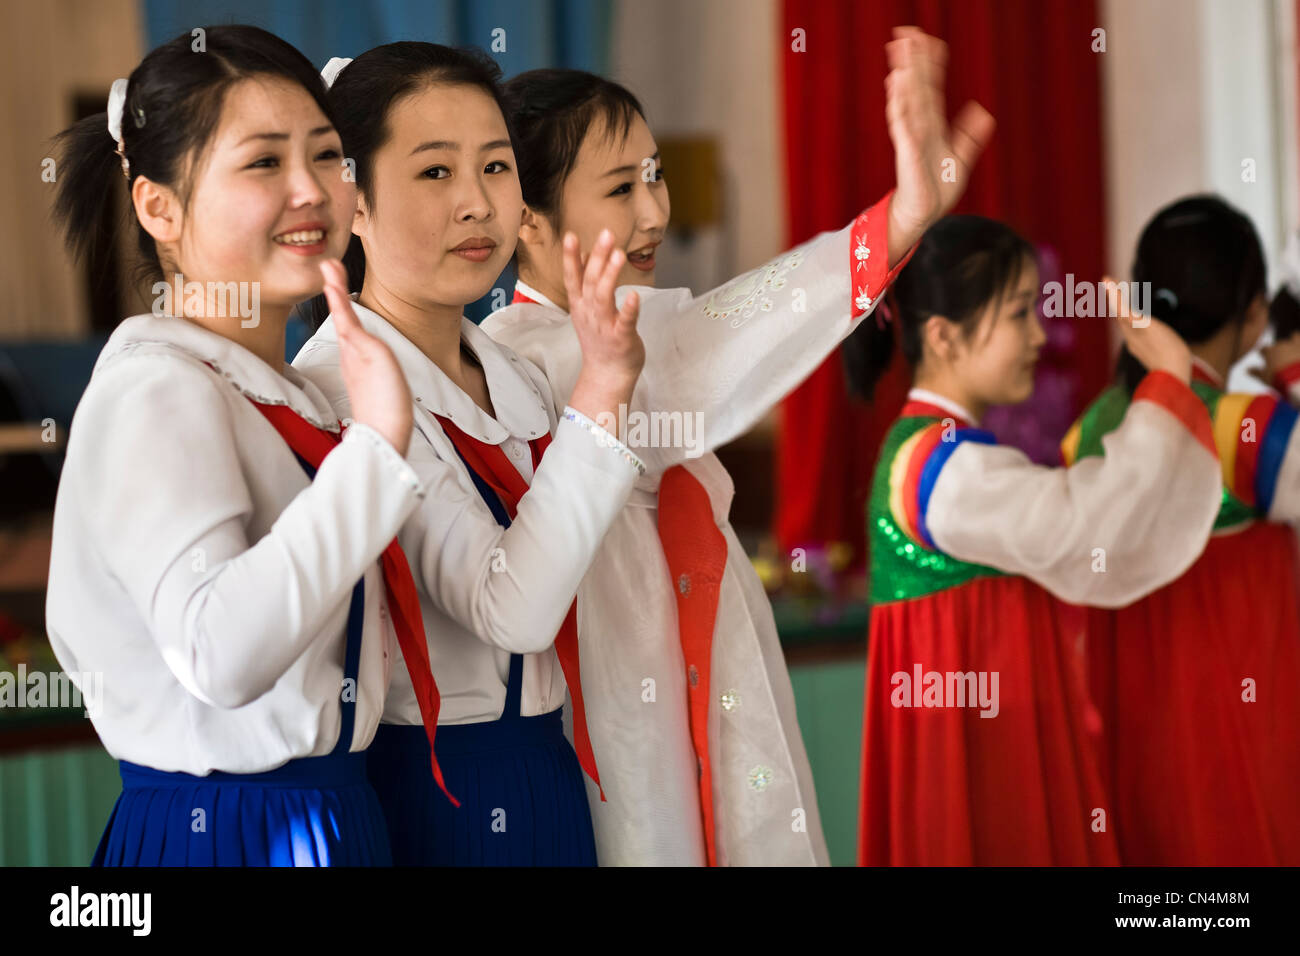 North Korea, Pyongyang, students waving goodbye to their foreign guest after a music performance in a model school Stock Photo